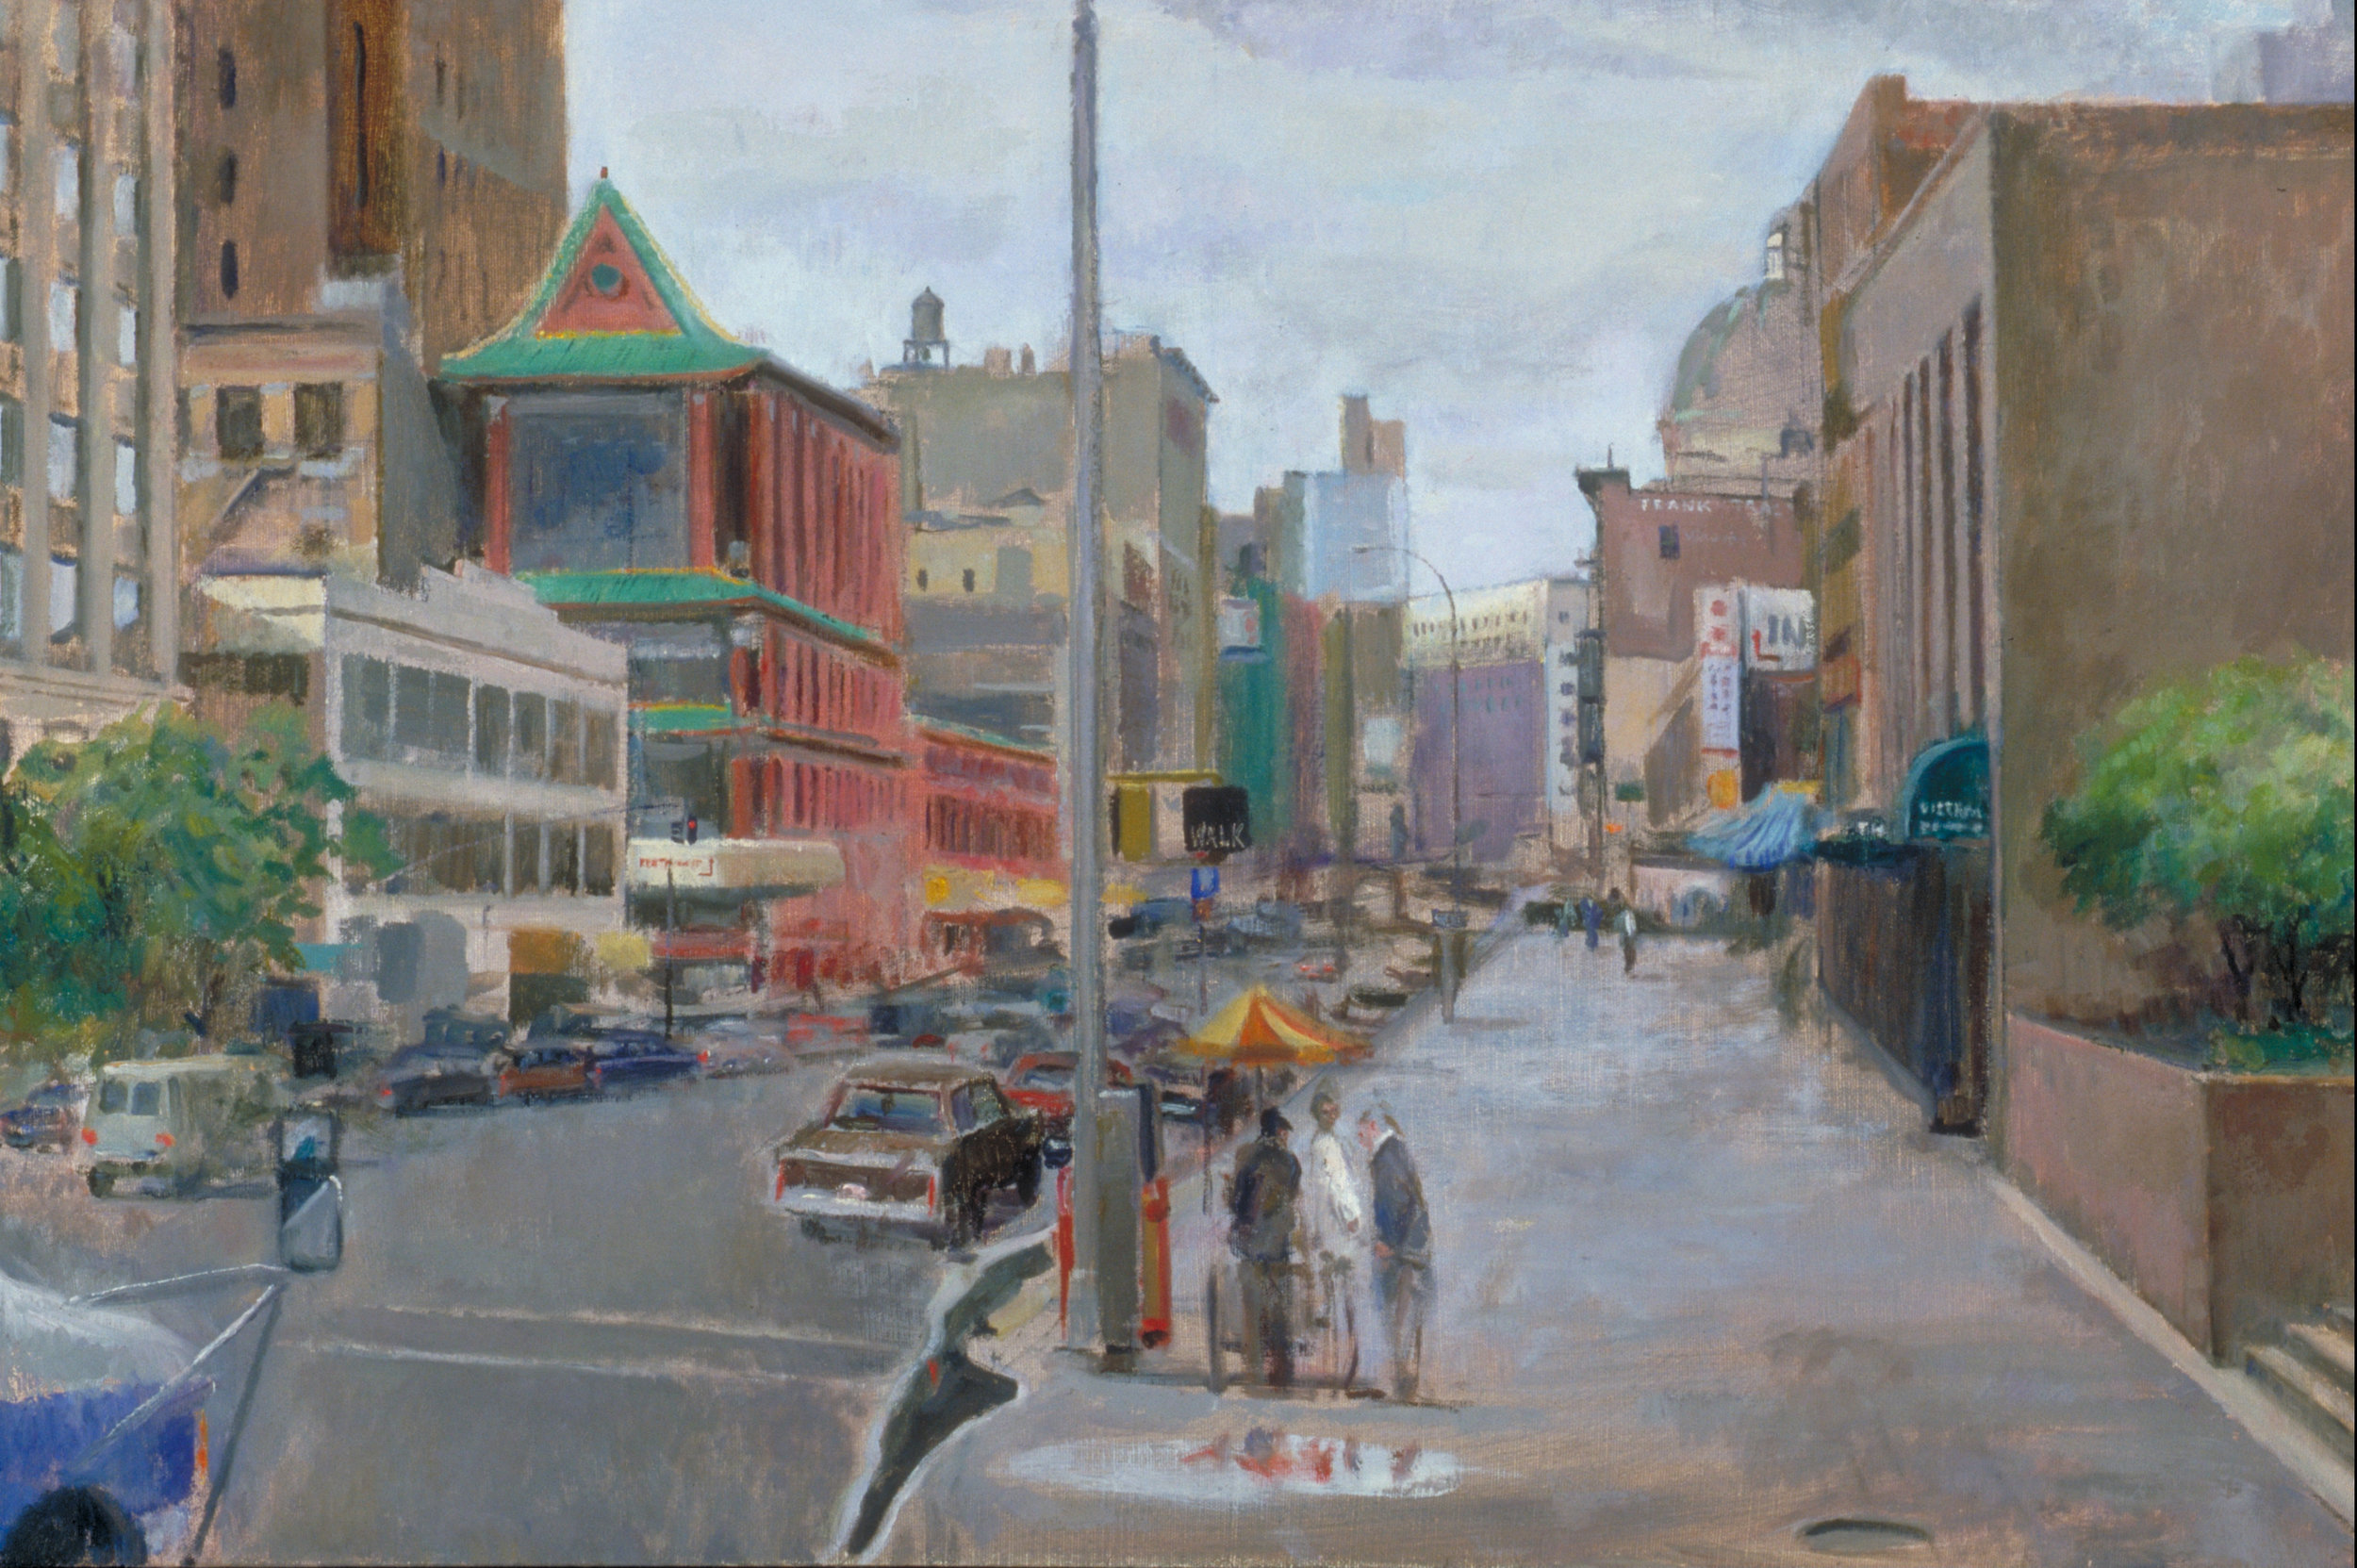 China Town, 24" x 36", oil on linen, 1995.